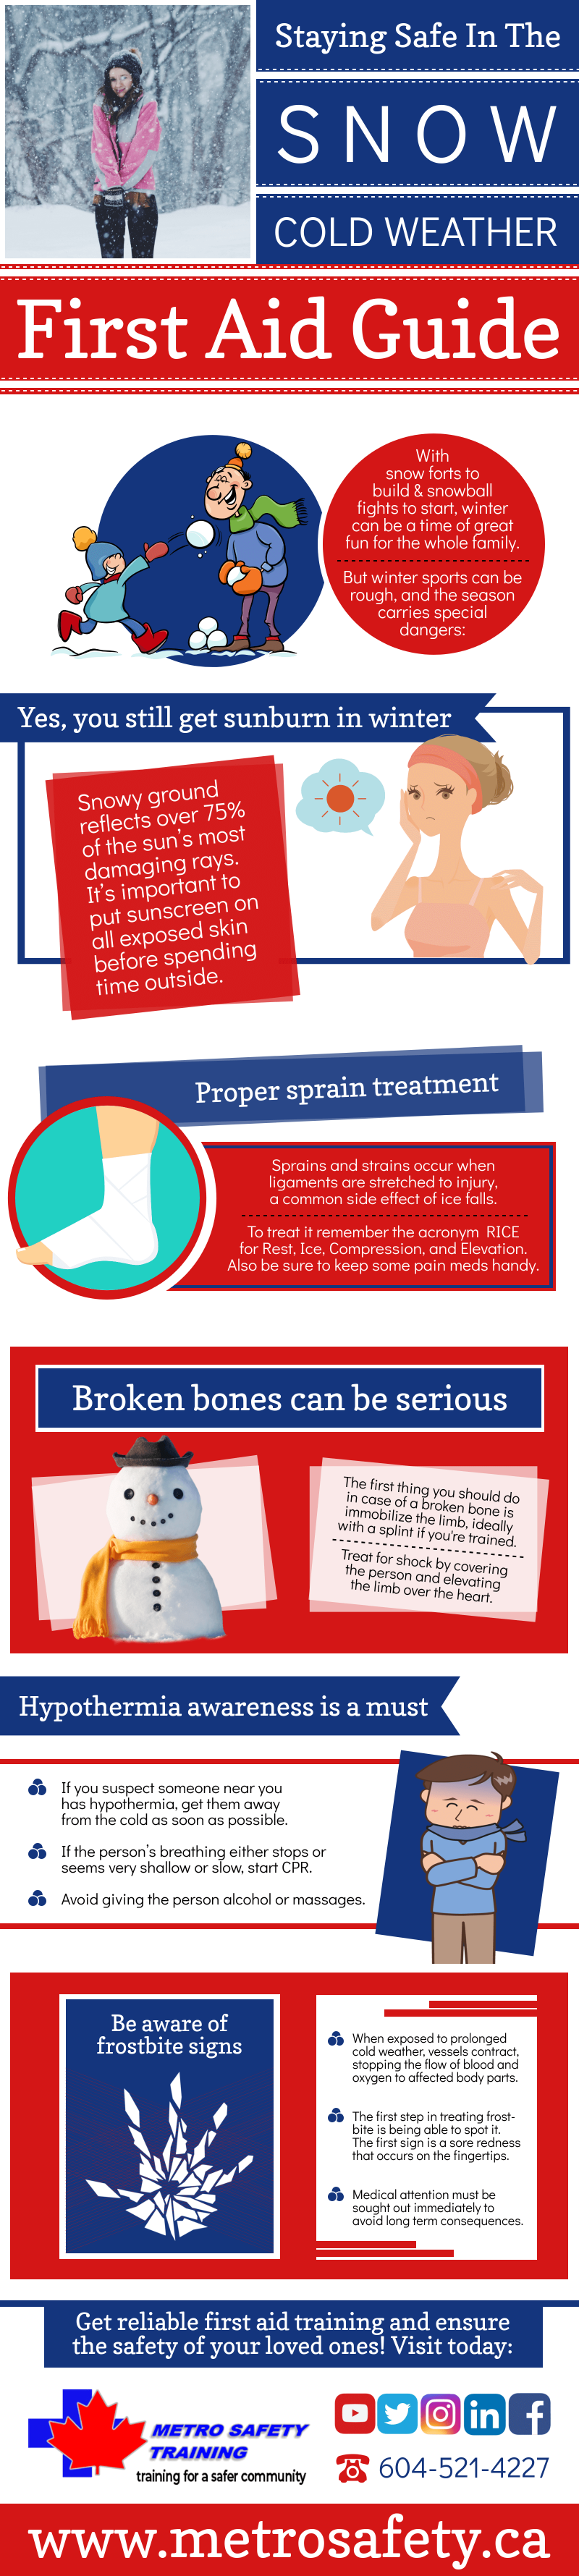 First Aid Guide- Stay Safe in The Snow Cold Weather